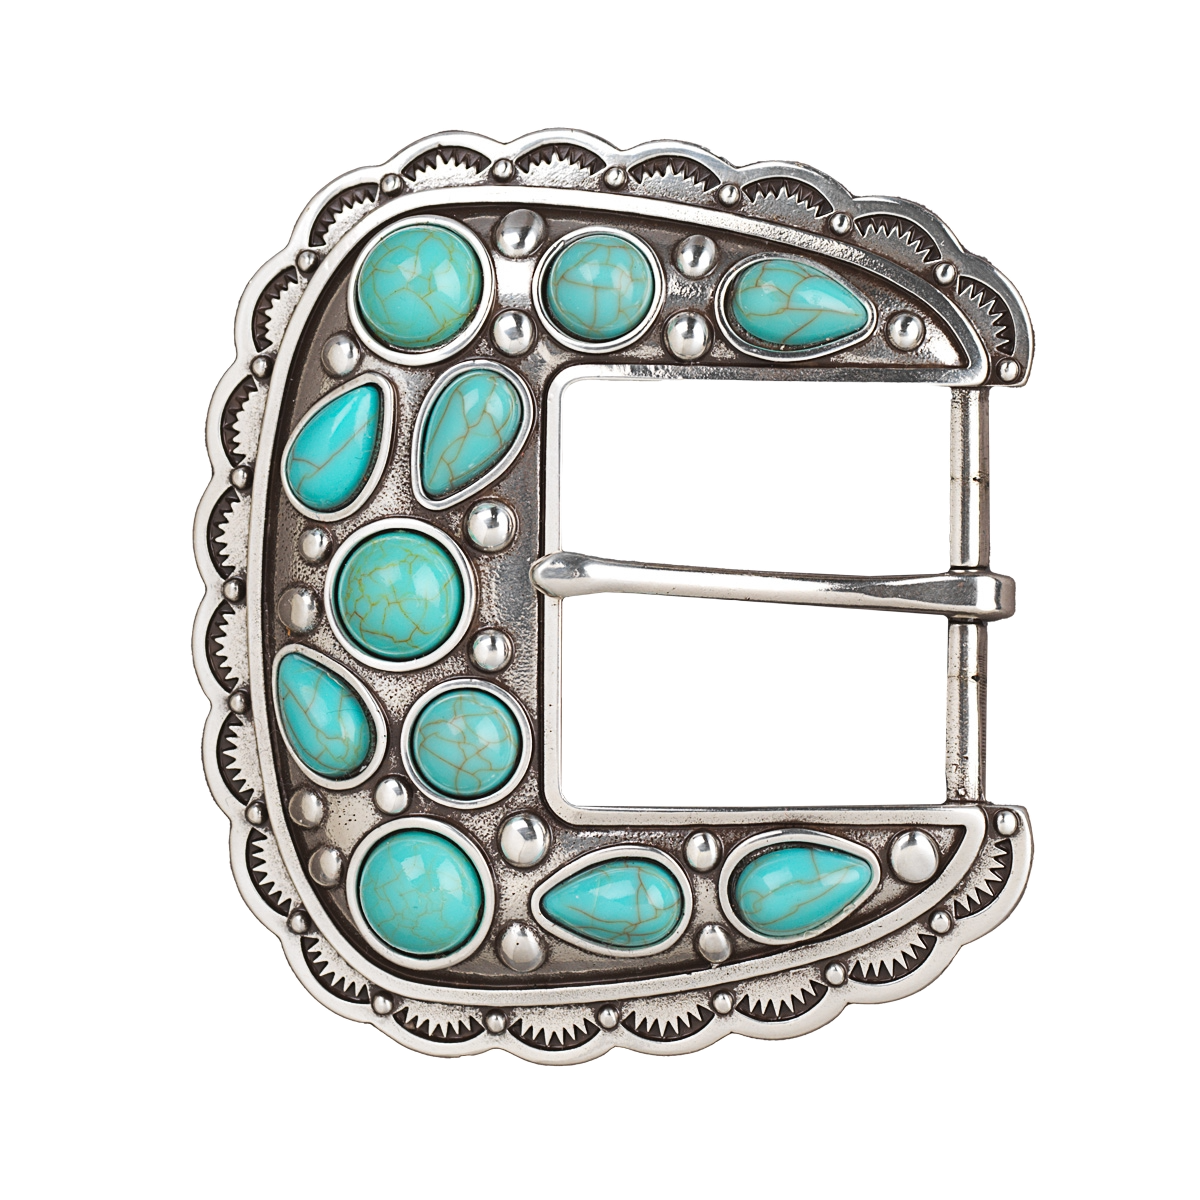 Load image into Gallery viewer, Blazin Roxx Ladies Square Turquoise Stone Belt Buckle
